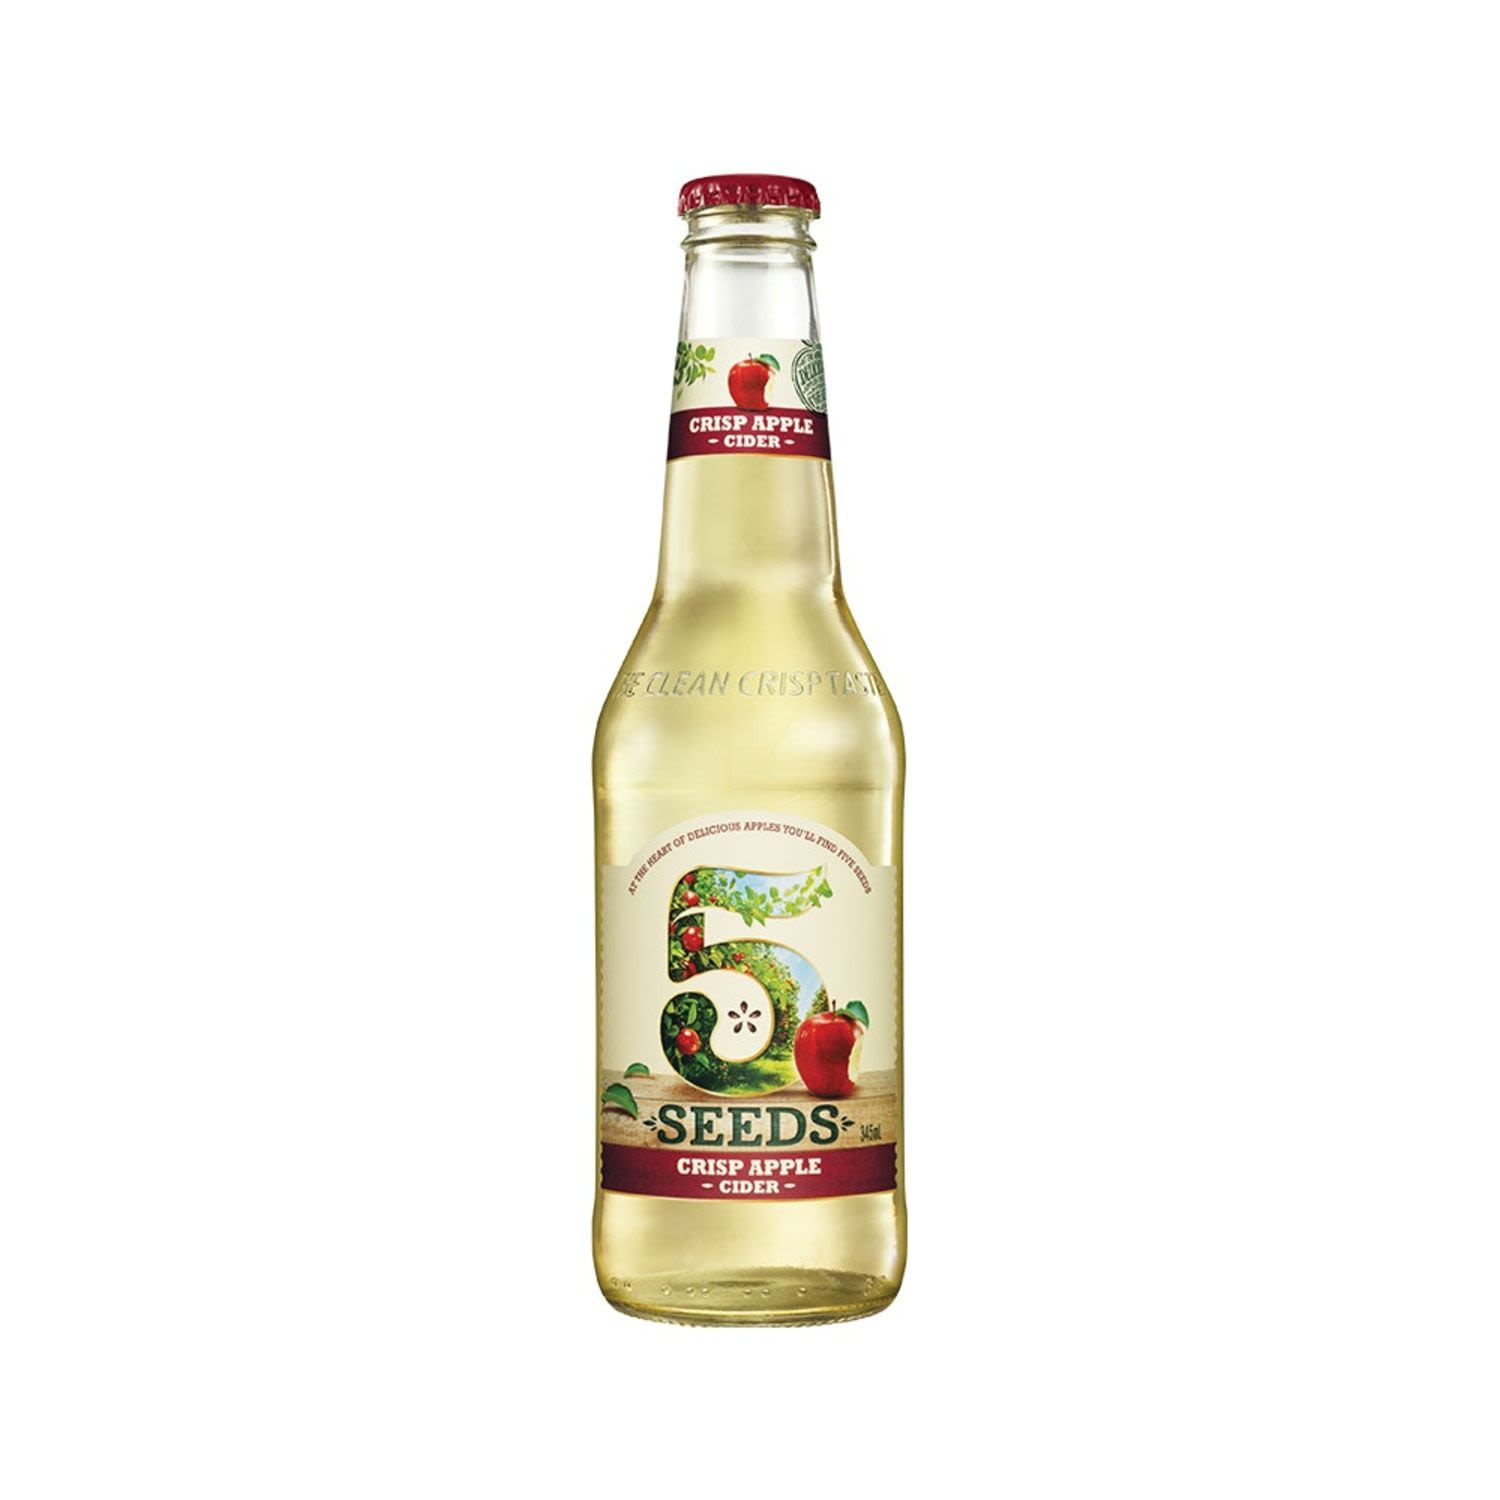 Crafted as a sparkling cider from crushed orchard apples to deliver a champagne-style aroma with rich apple flavour. For those who prefer a less sweet cider, but not too dry.<br /> <br />Alcohol Volume: 5.00%<br /><br />Pack Format: Bottle<br /><br />Standard Drinks: 1.4</br /><br />Pack Type: Bottle<br /><br />Country of Origin: Australia<br />